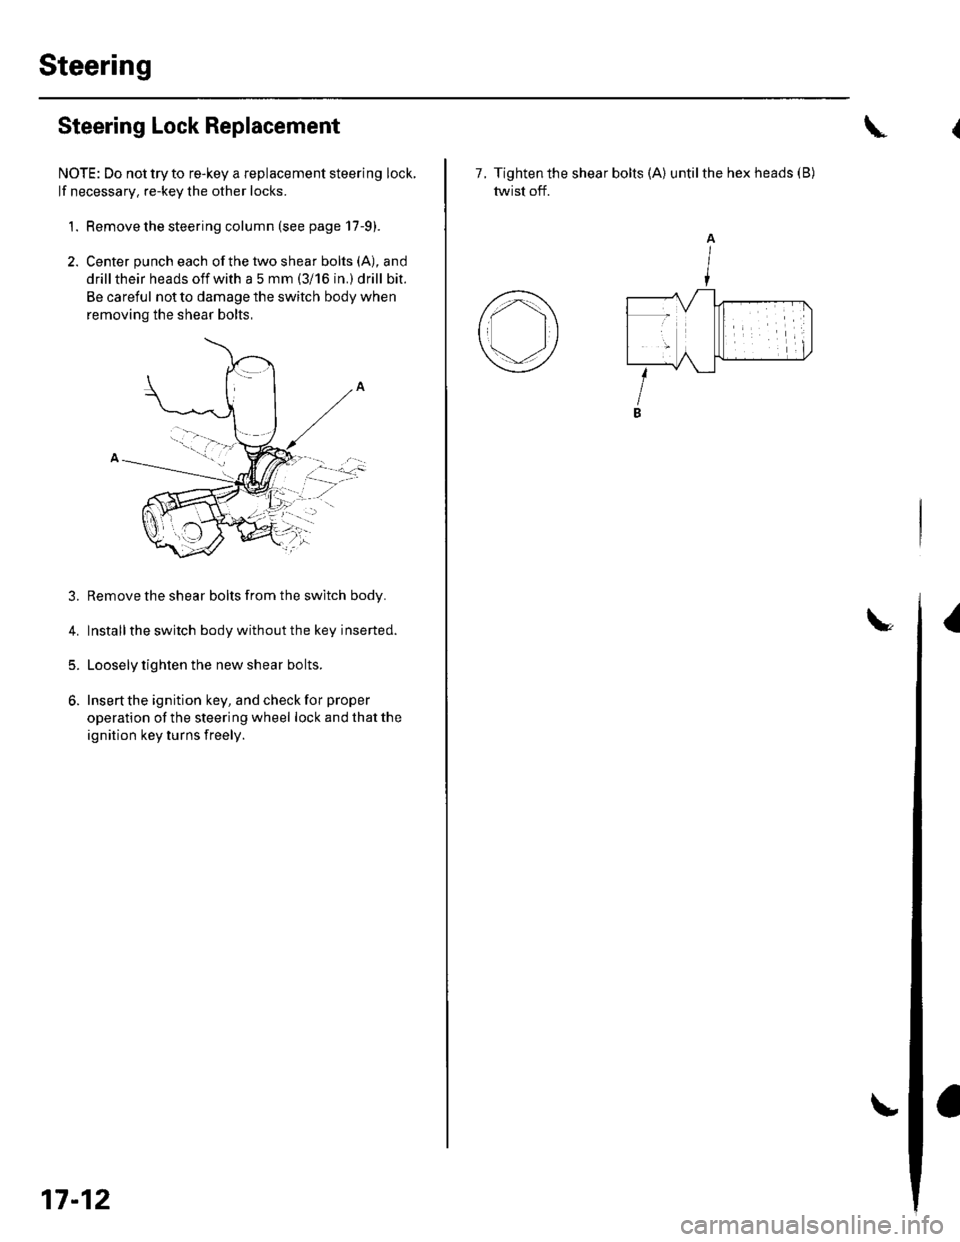 HONDA CIVIC 2003 7.G Workshop Manual Steering
Steering Lock Replacement
NOTE: Do not try to re-key a replacement steering lock.
lf necessary, re-key the other locks.
1. Remove the steering column (see page 17-9).
2. Center punch each oft